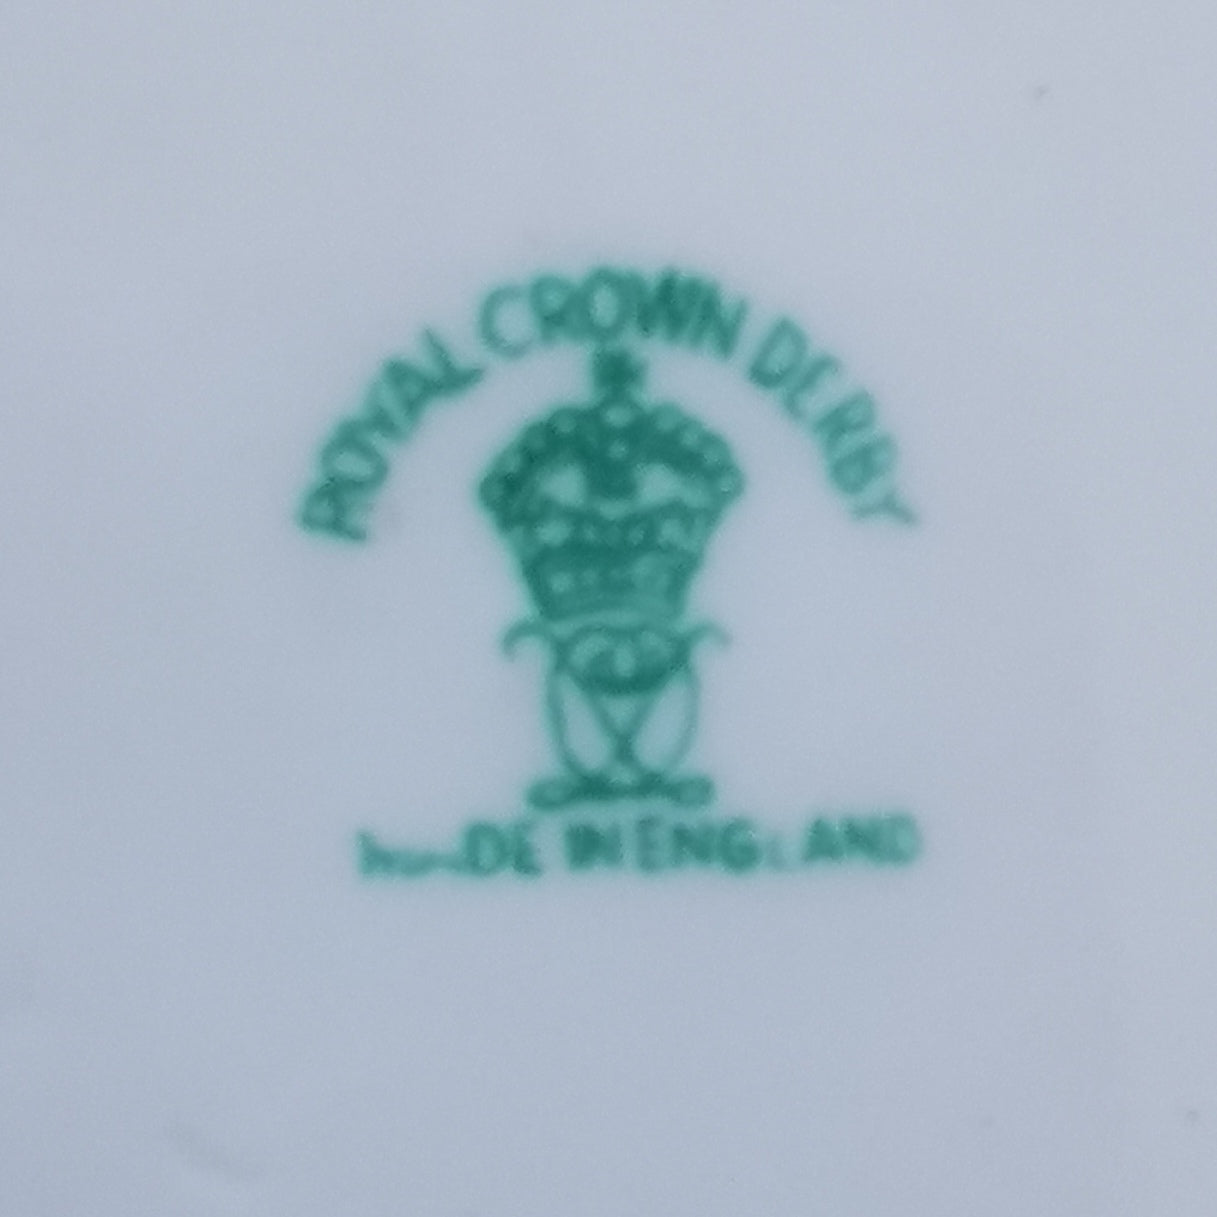 1940s royal crown derby marks